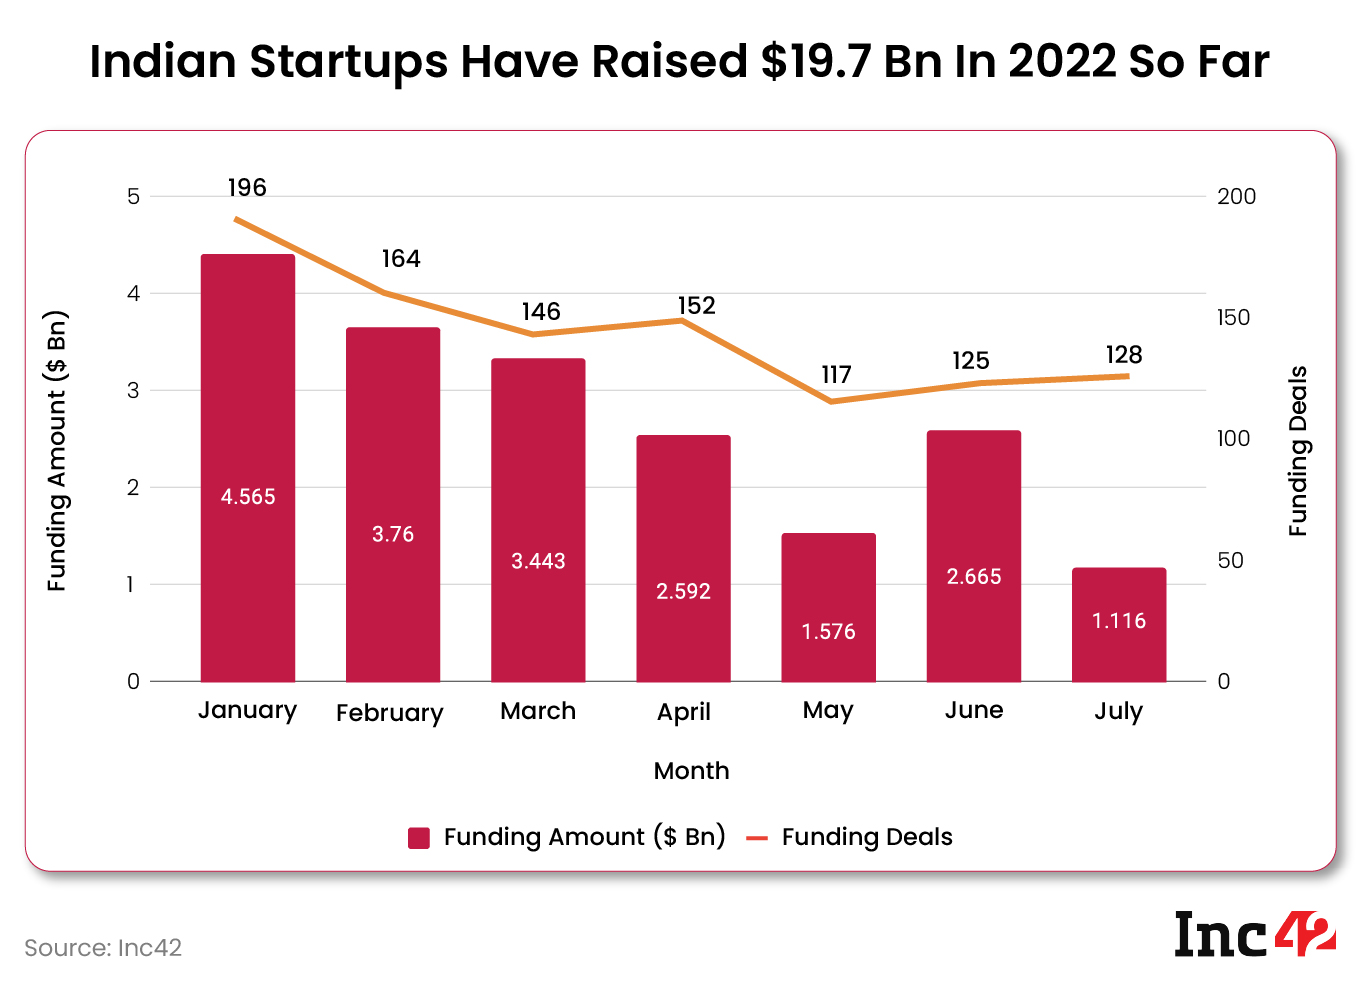 Indian startups have raised $19.7 Bn funding in 2022